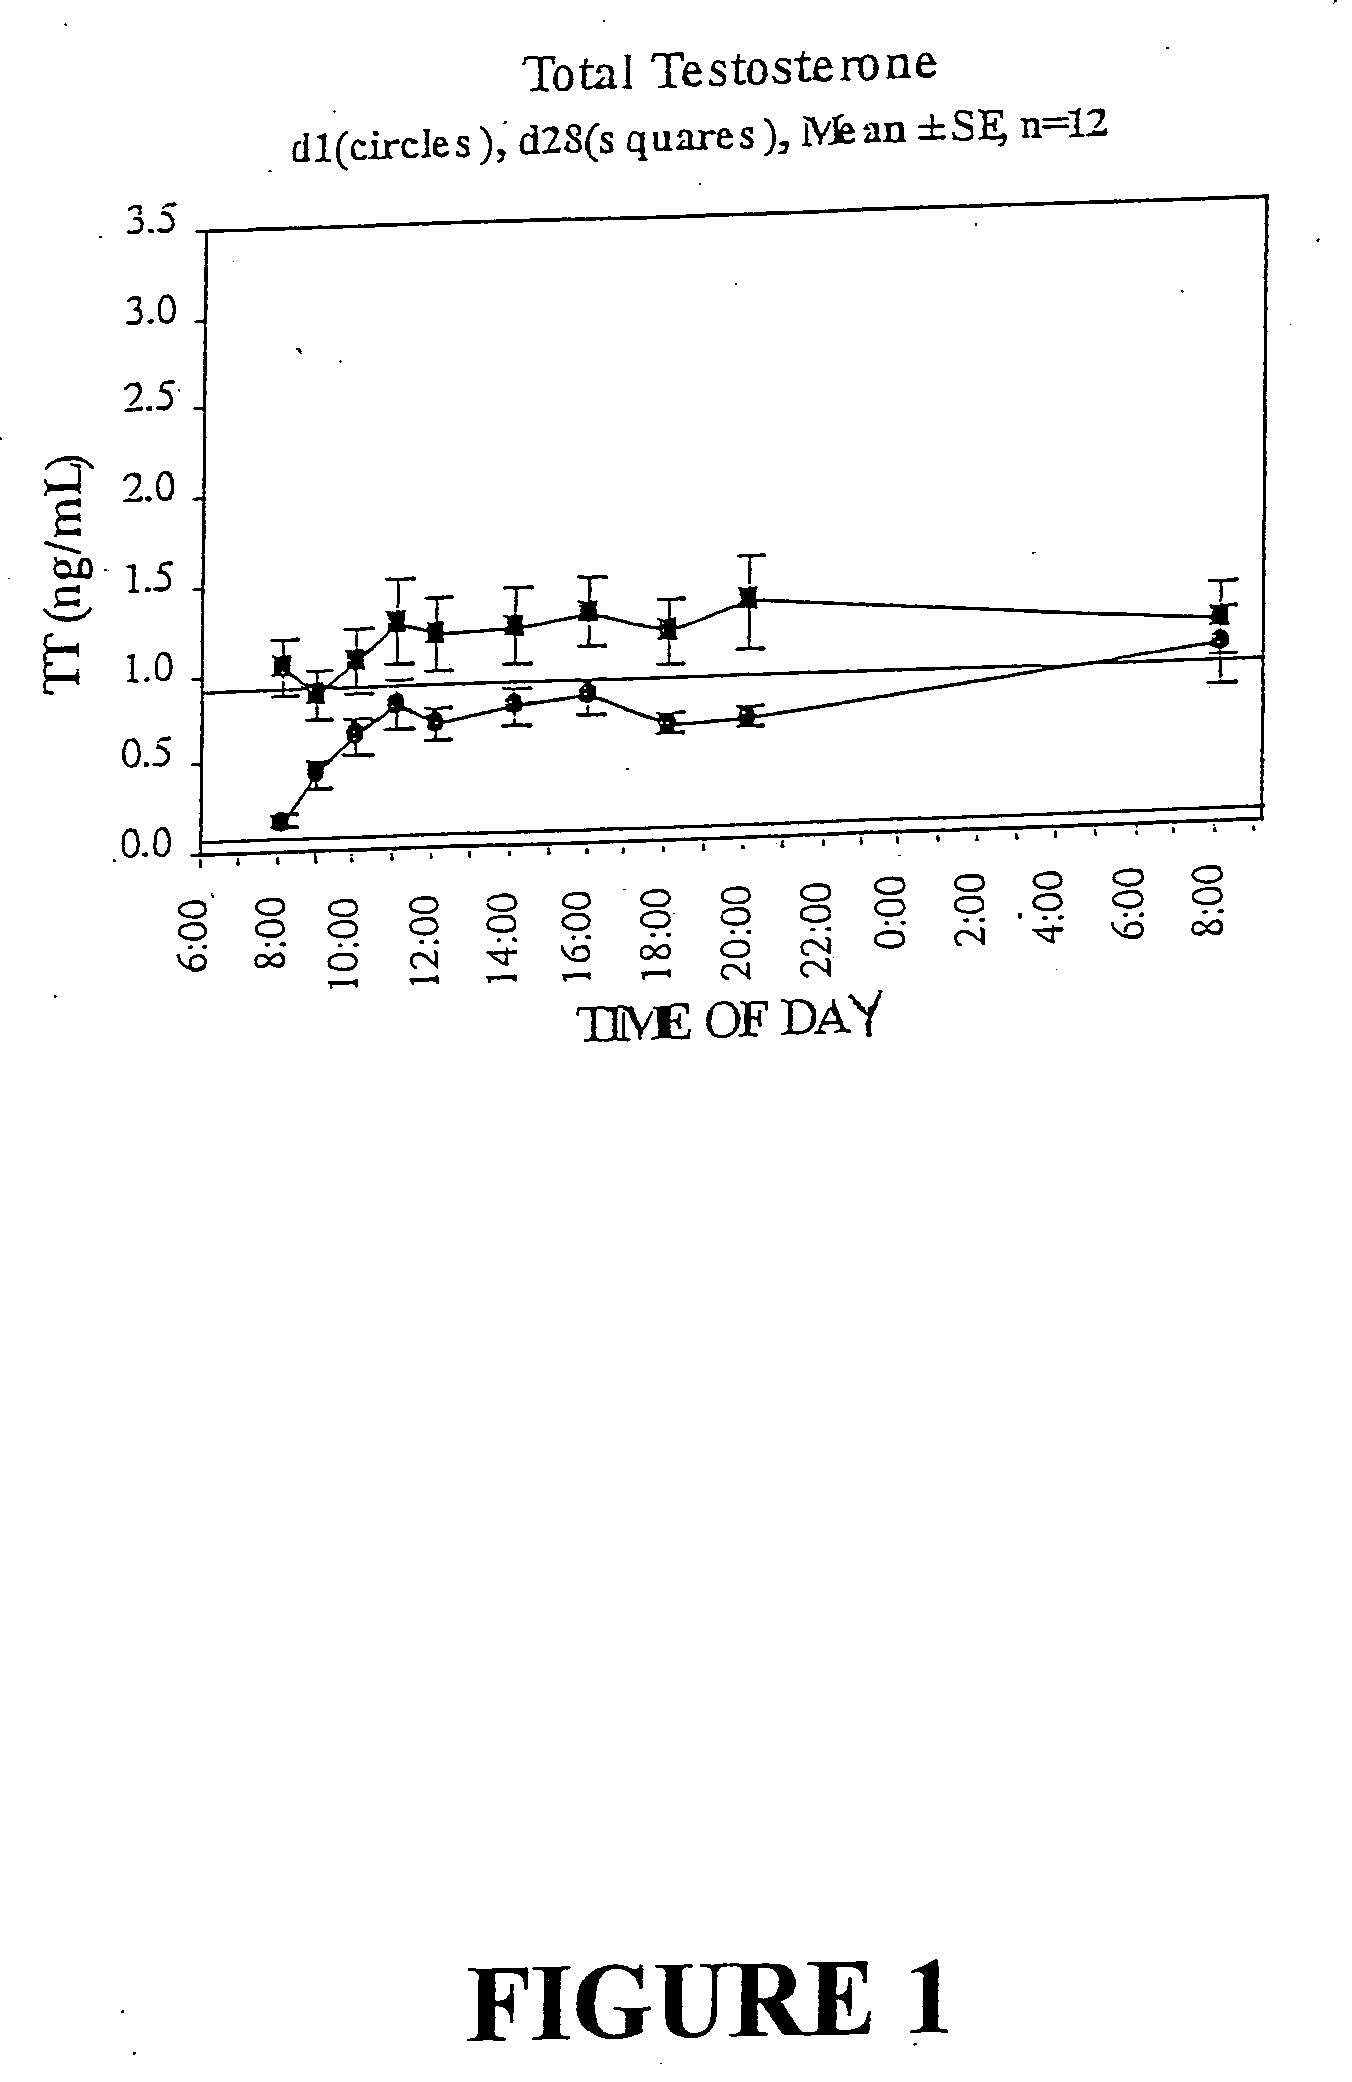 Trandsdermal compositions and methods for treatment of fibromyalgia and chronic fatigue syndrome